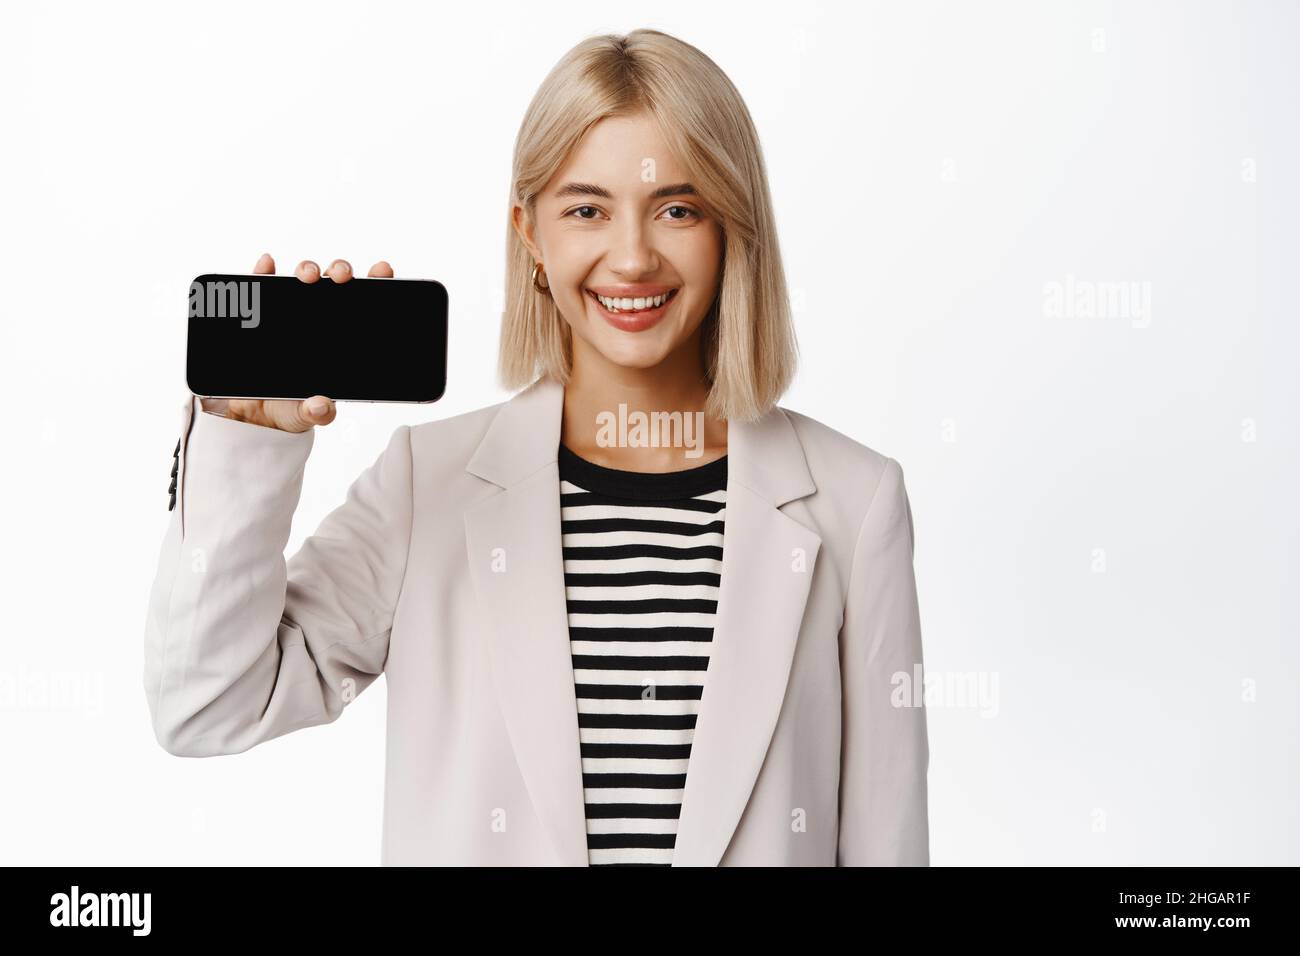 Image of smiling saleswoman showing mobile phone horizontal, demonstrating online store, company website on smartphone, standing in suit over white Stock Photo